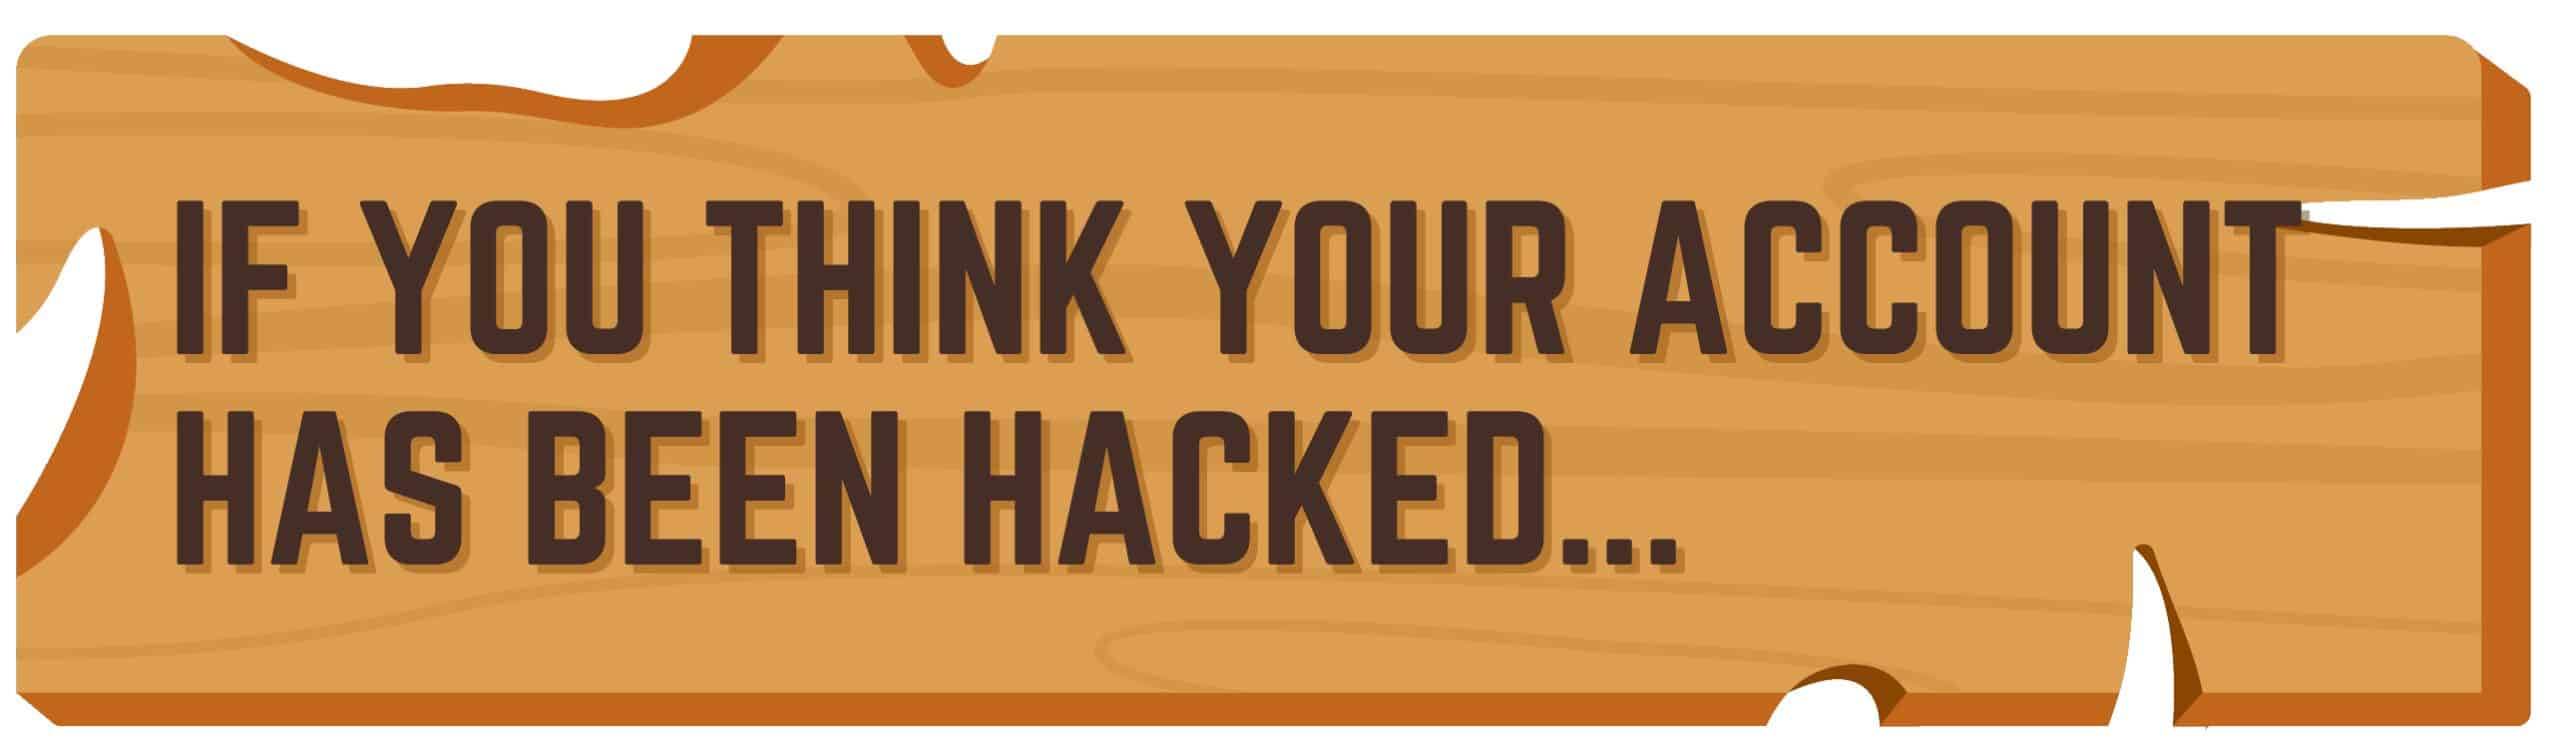 Wooden signpost illustration that reads: "If you think your account has been hacked..."